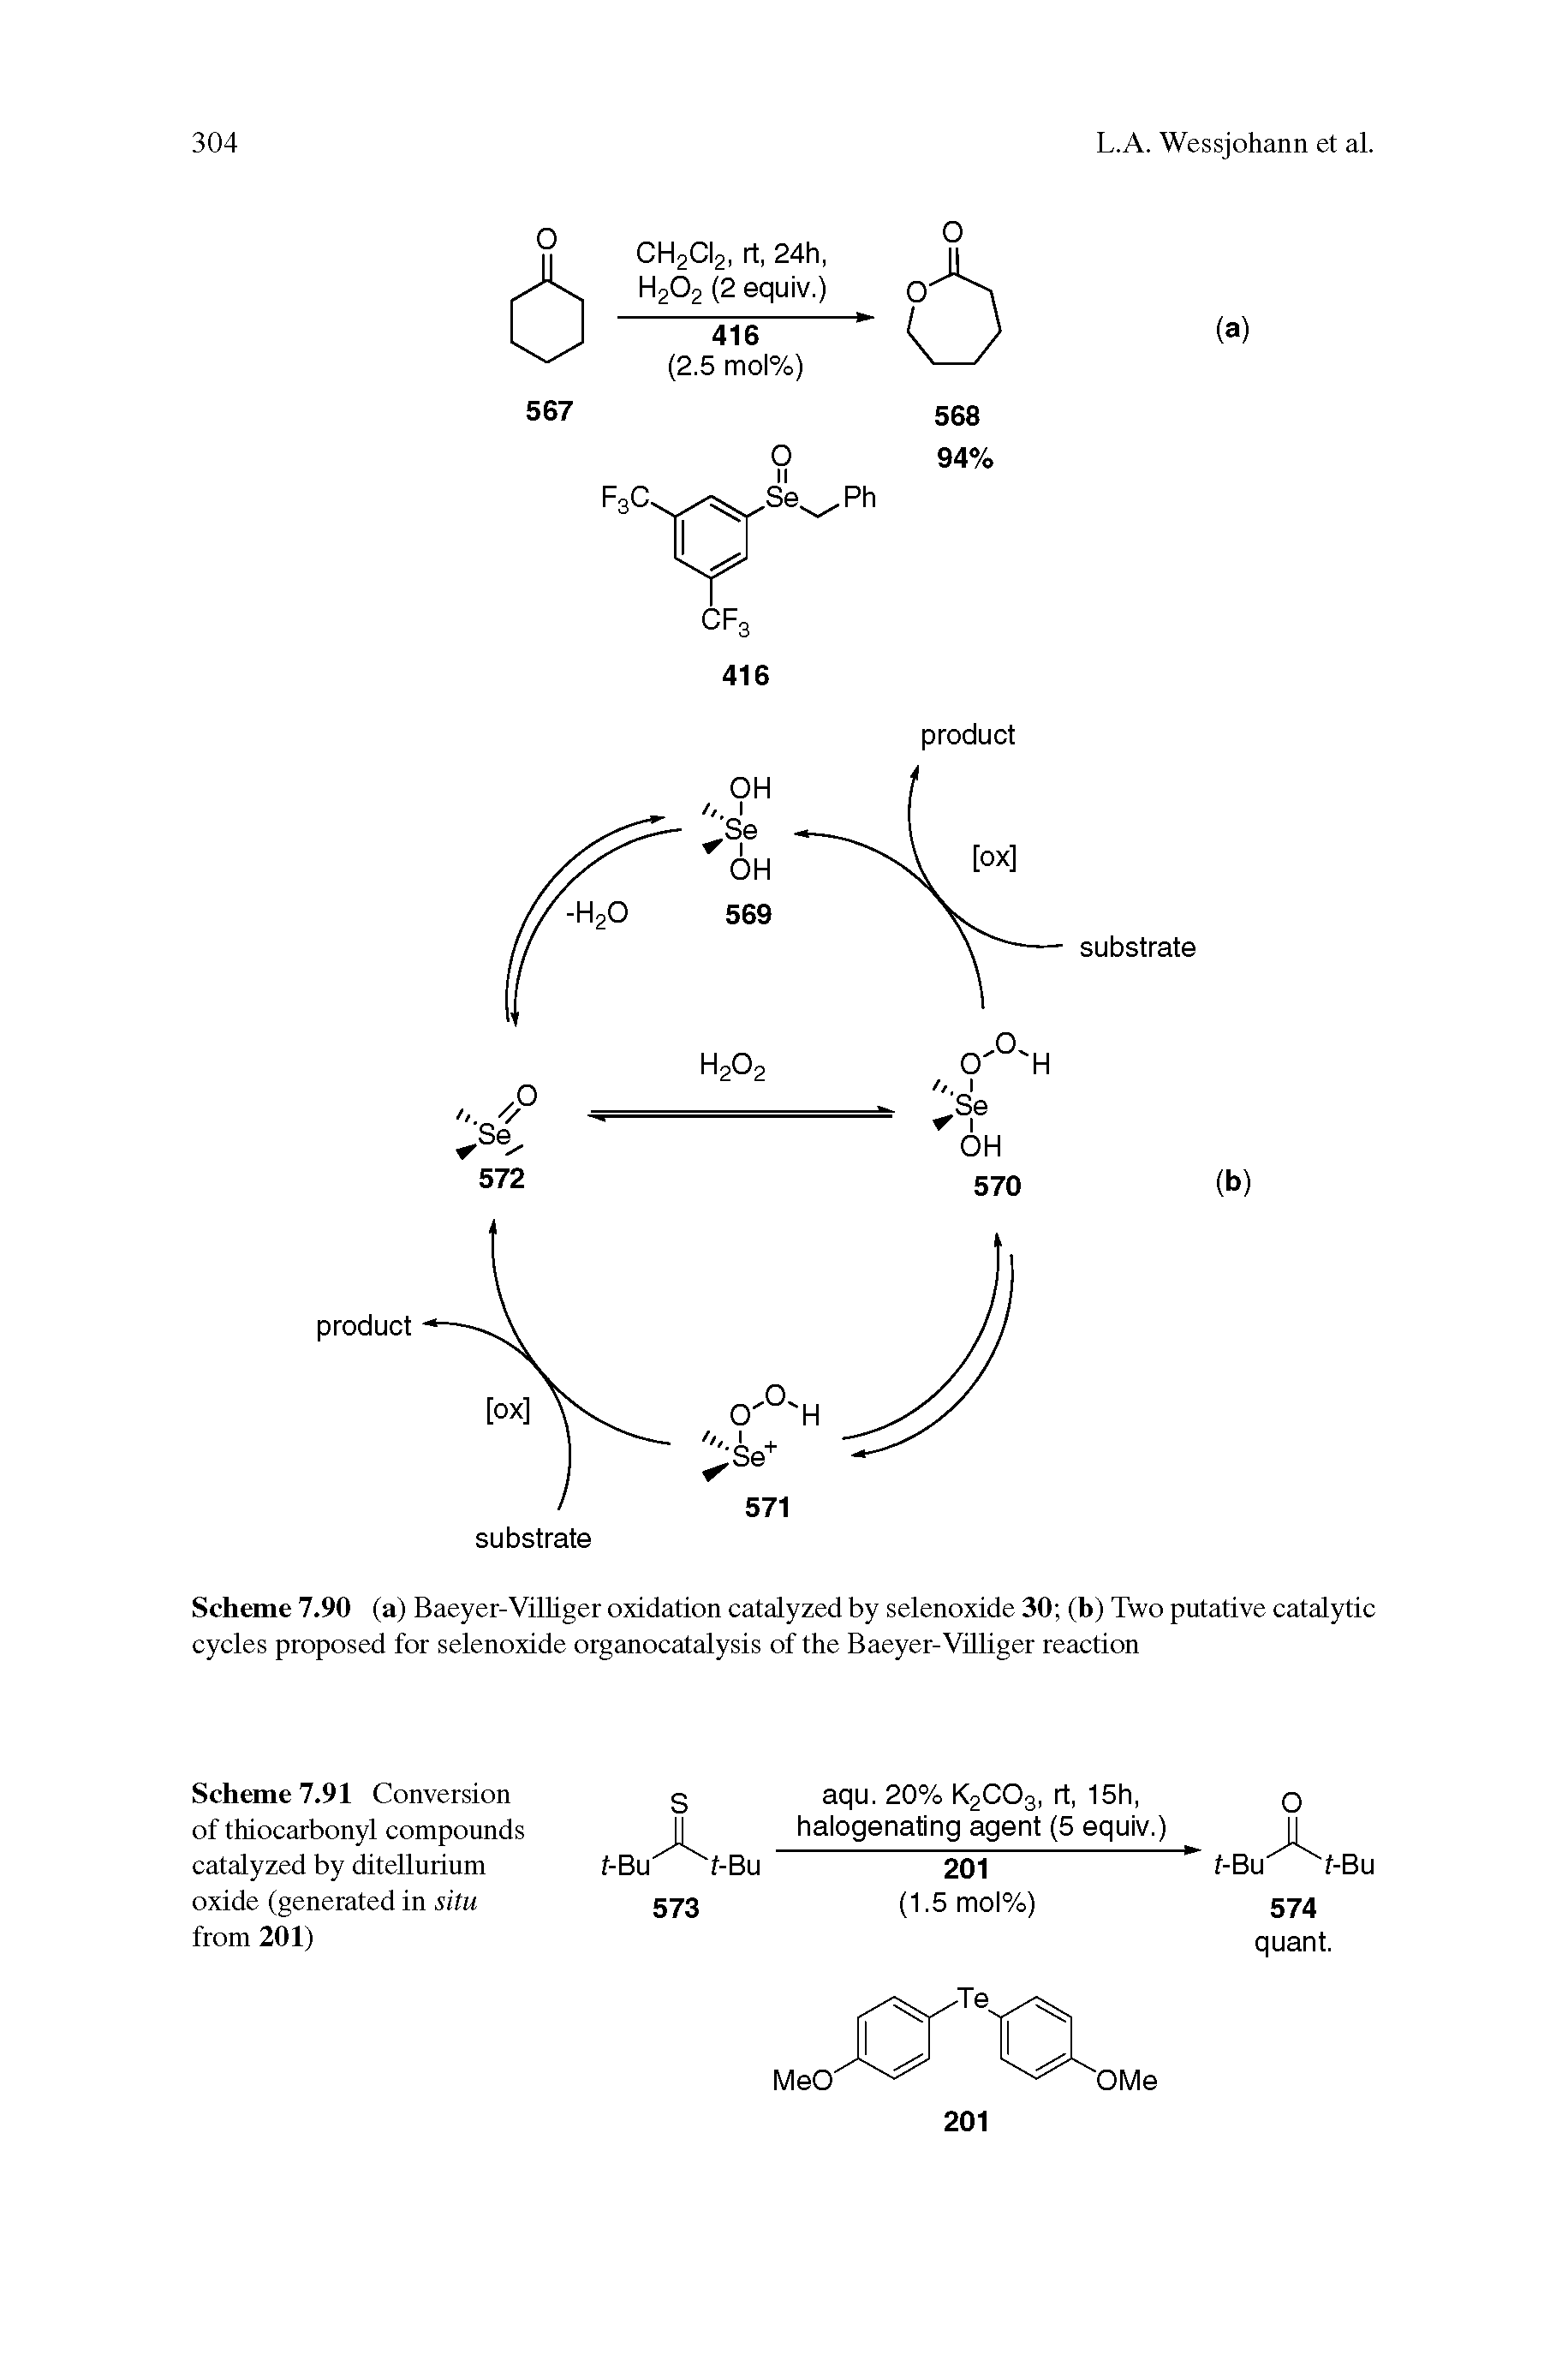 Scheme 7.91 Conversion of thiocarbonyl compounds catalyzed by ditelluiium oxide (generated in situ from 201)...